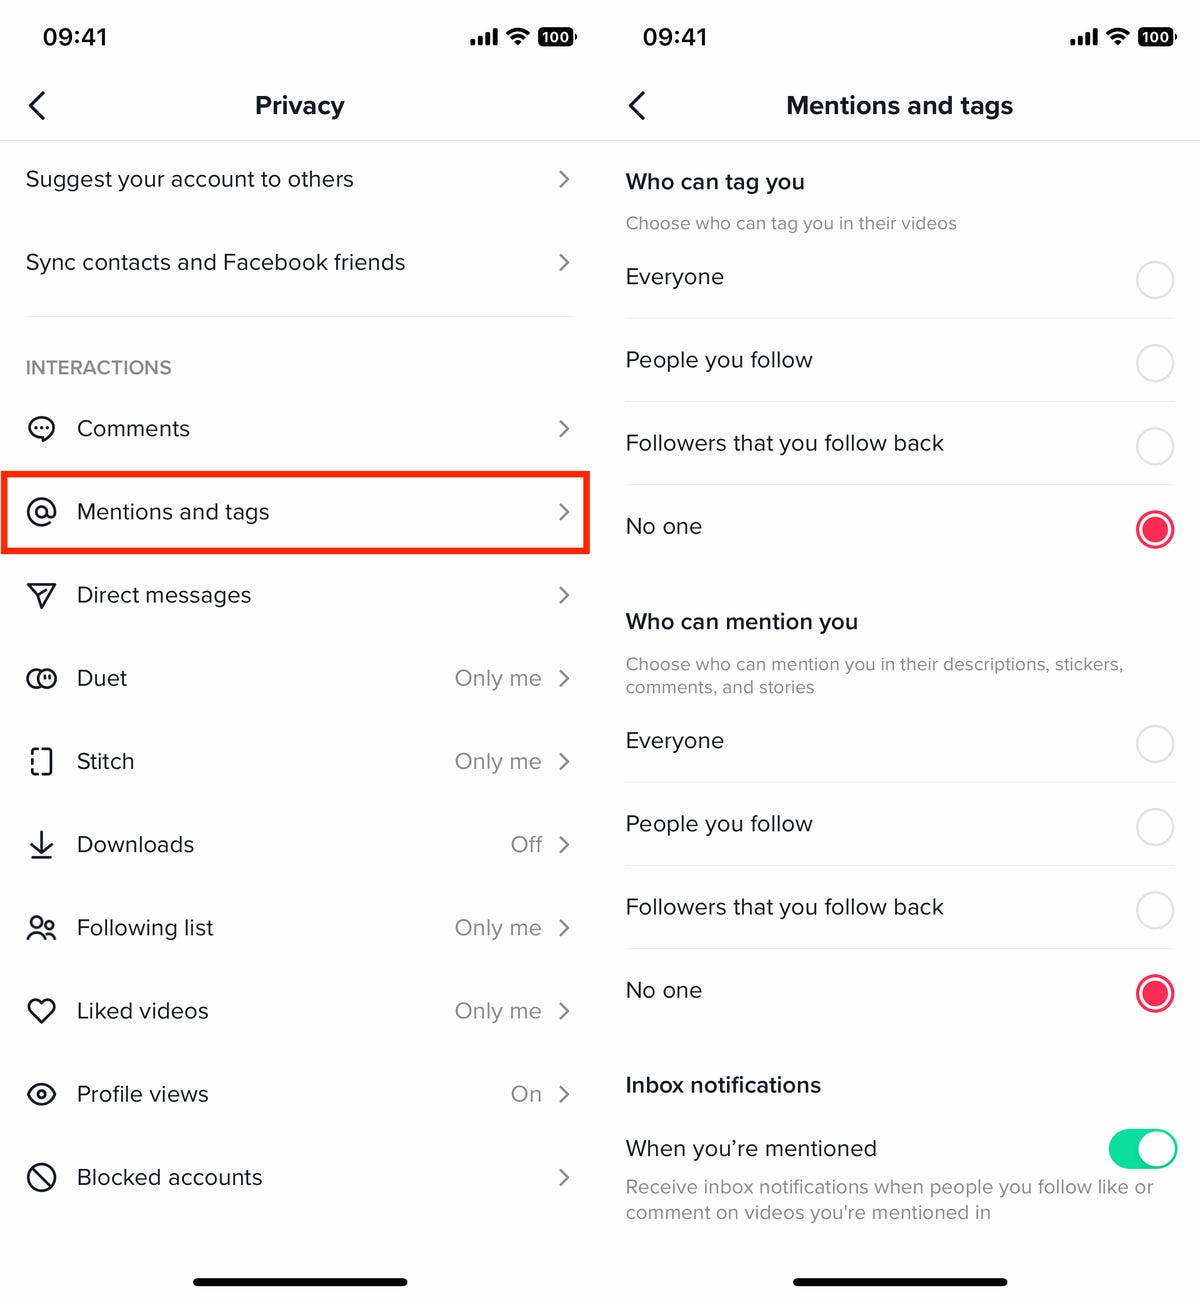 Mentions and tags settings on TikTok